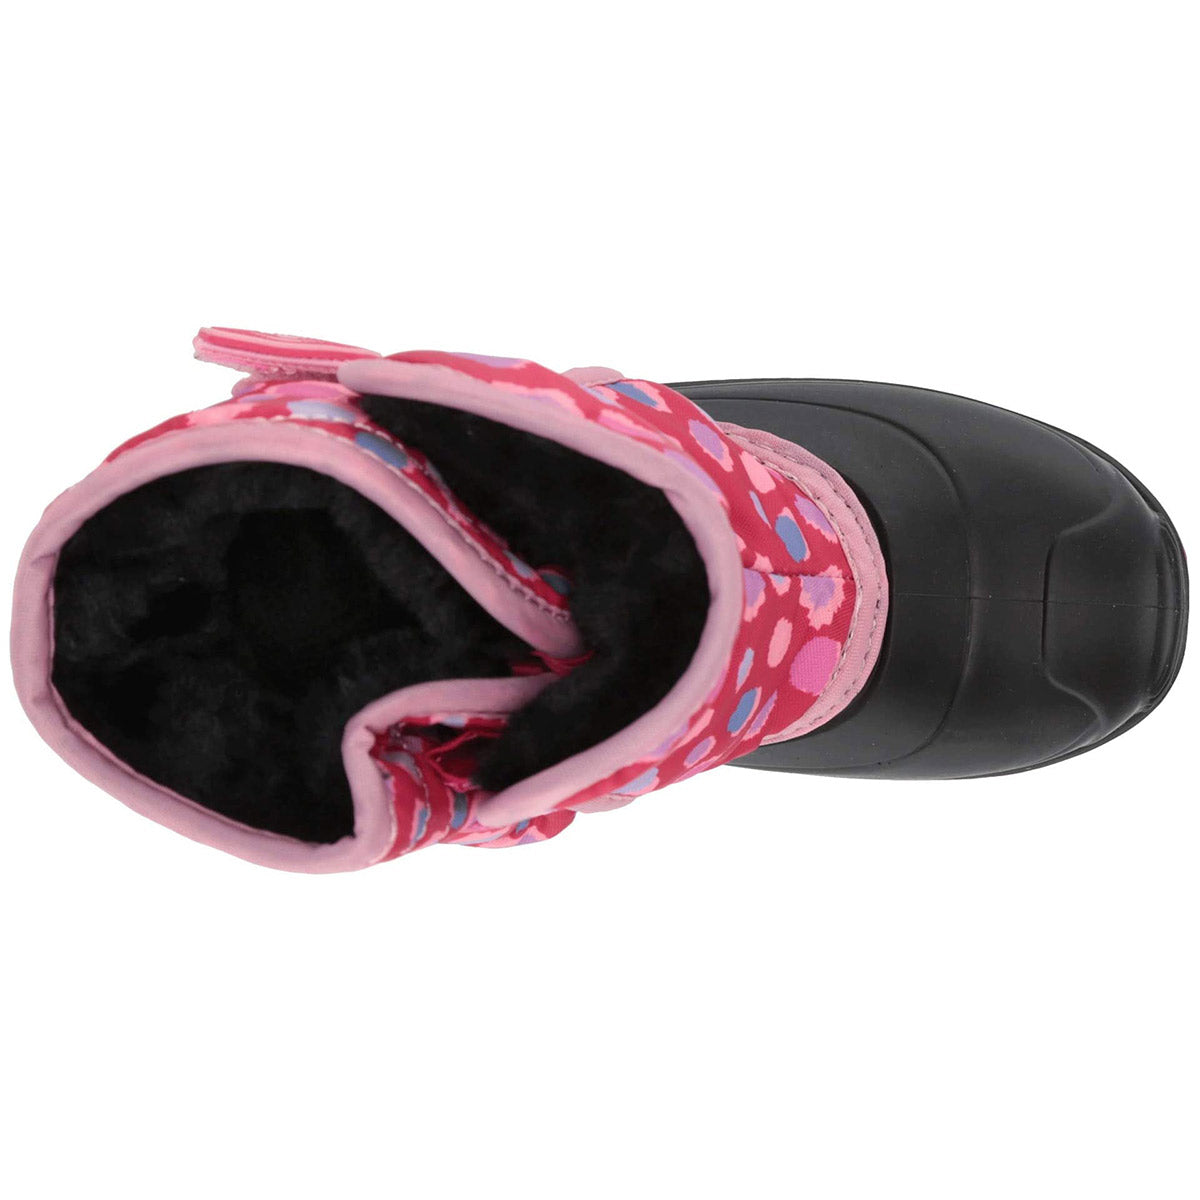 Top-down view of a child&#39;s pink and red polka dot Kamik Snowbug 4 Bright Rose toddlers snow boot with faux fur lining, comfortable down to -10°F.